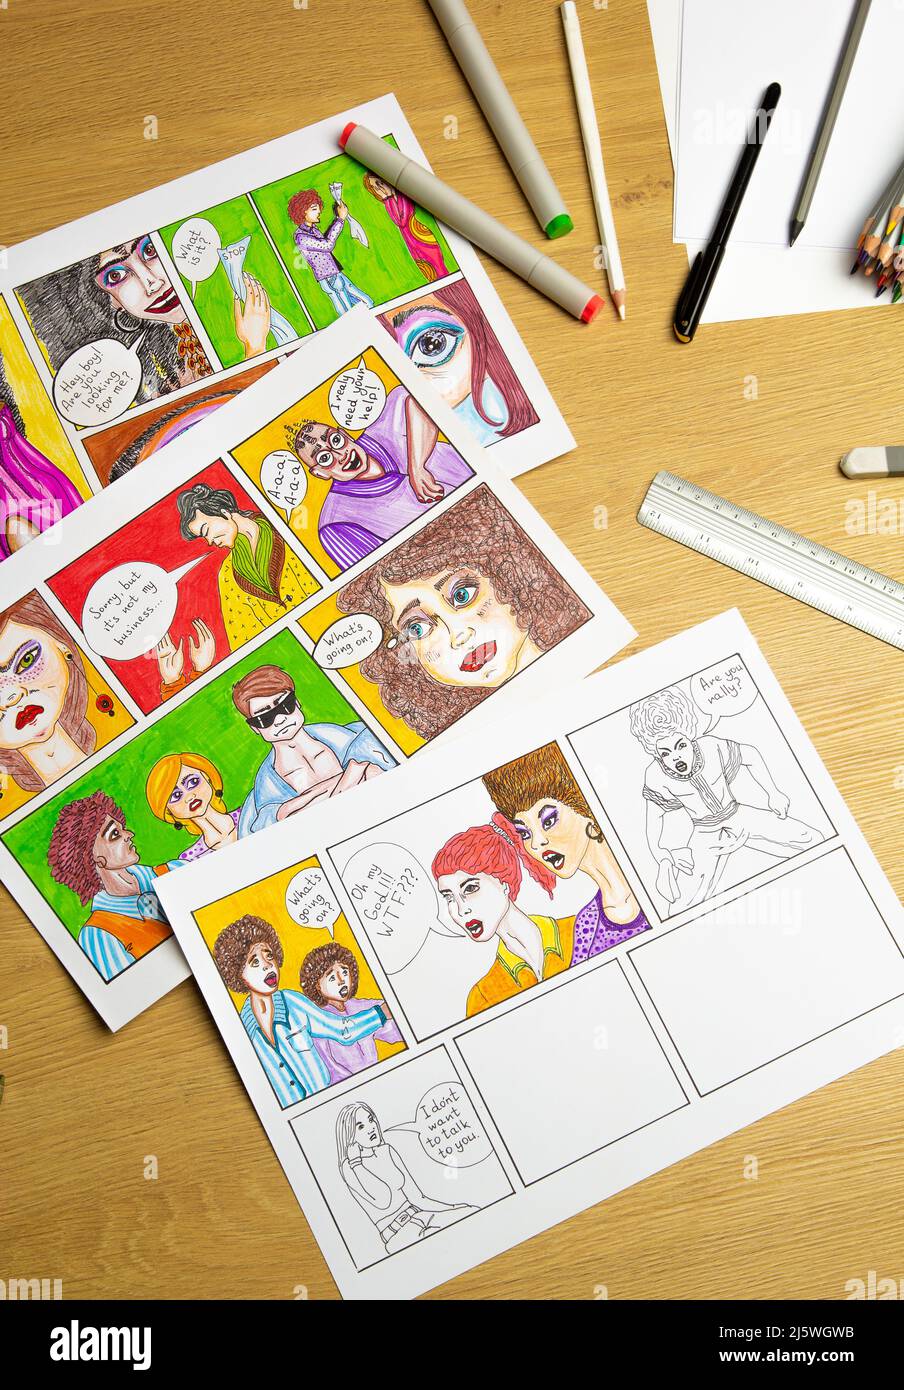 Comic book storyboard on paper. Design animation sketches. Stock Photo